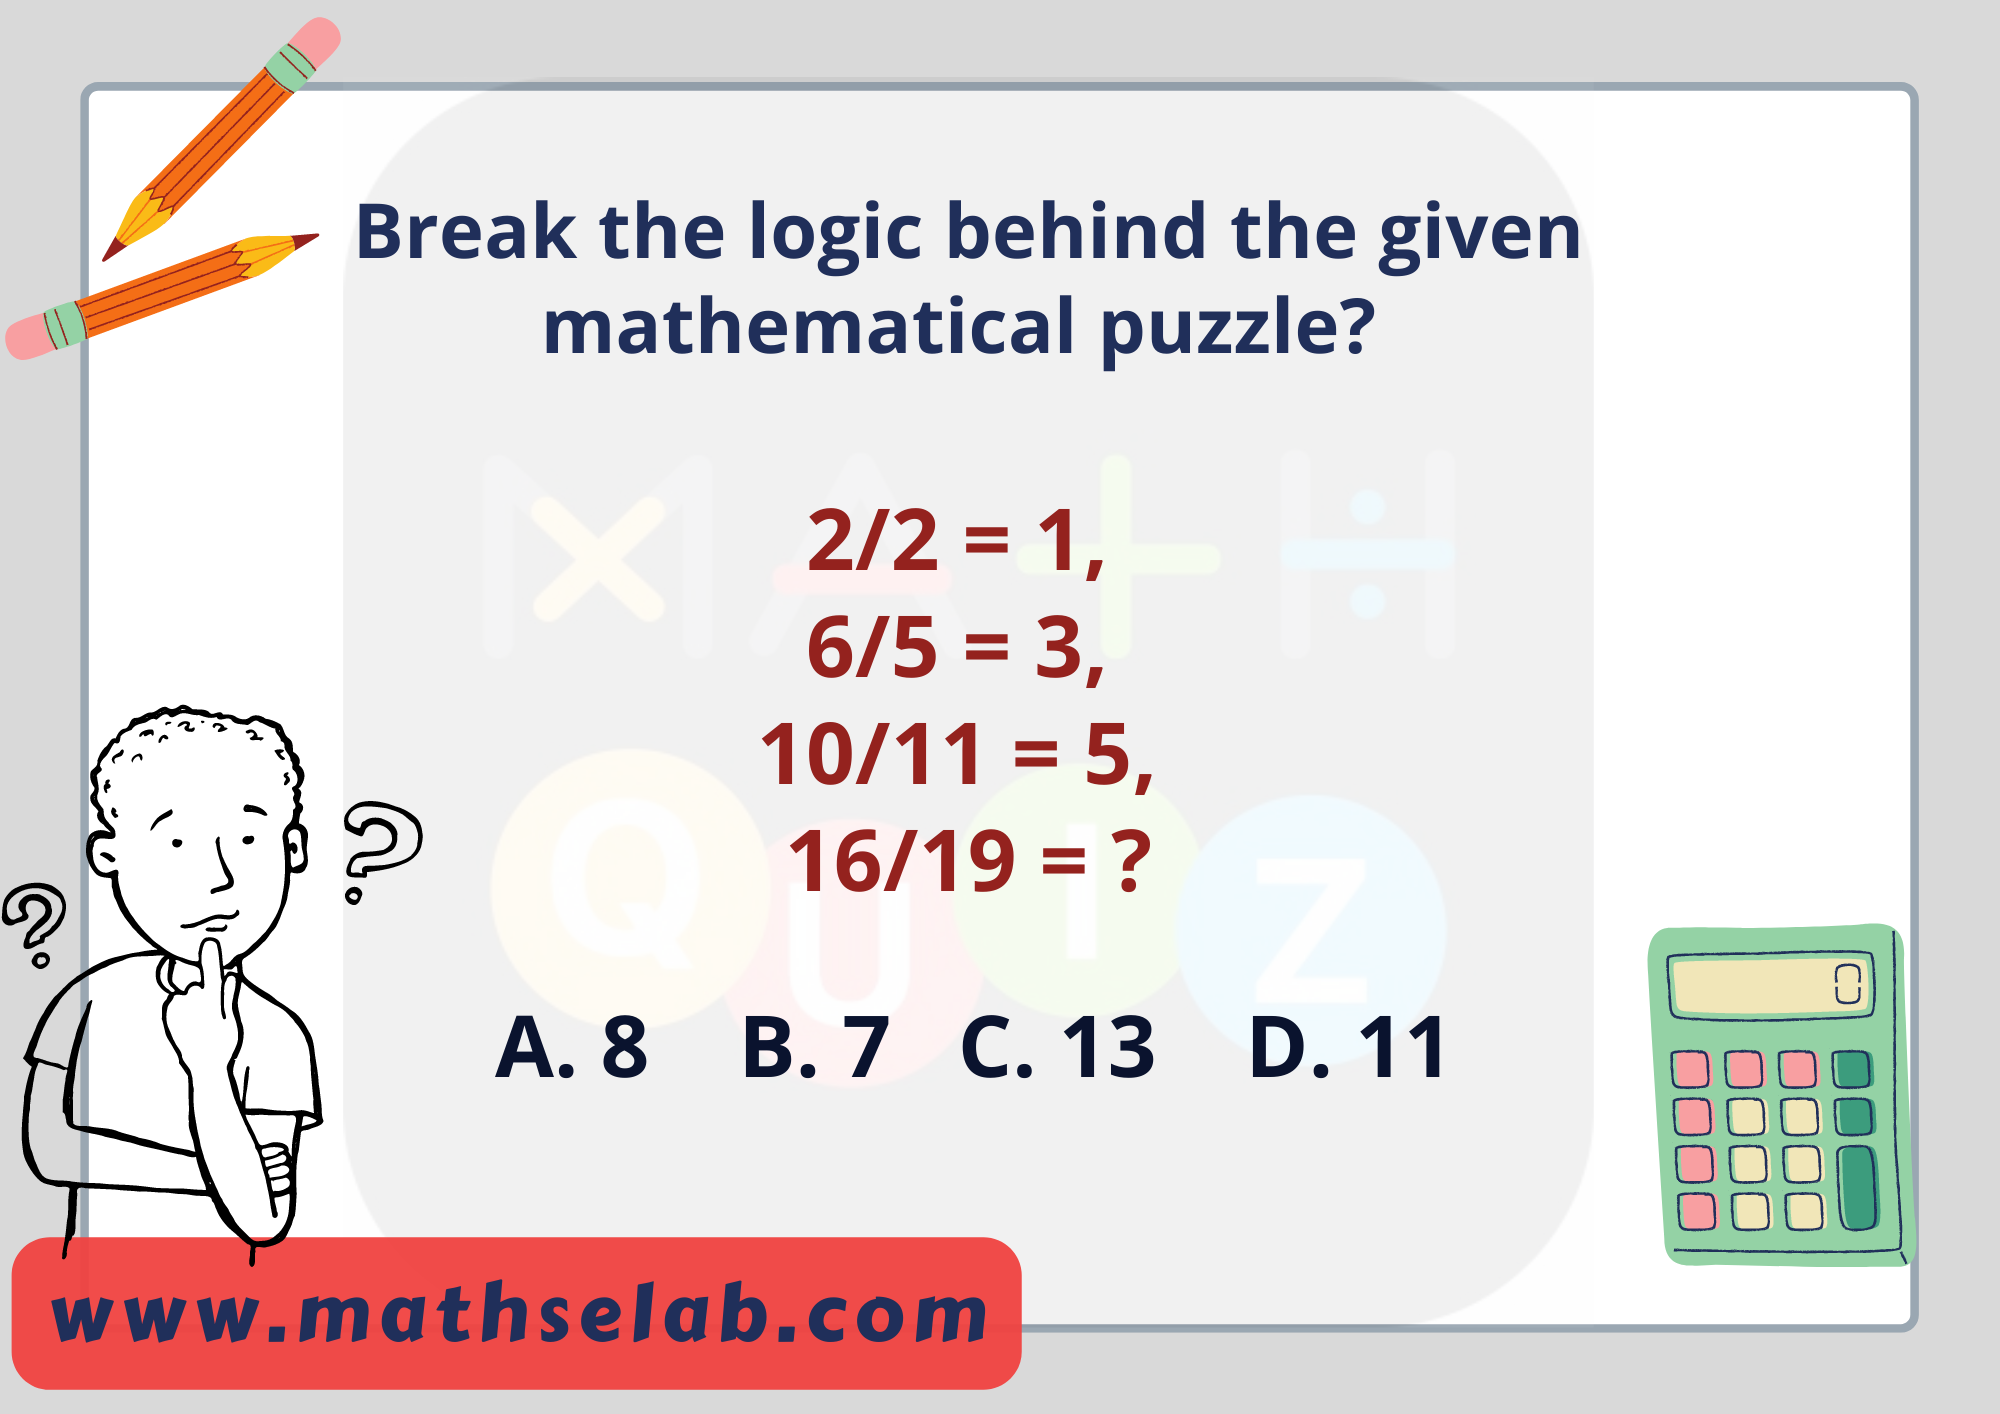 Break the logic behind the given mathematical puzzle 22 = 1, 65 = 3, 1011 = 5, 1619 = - www.mathselab.com